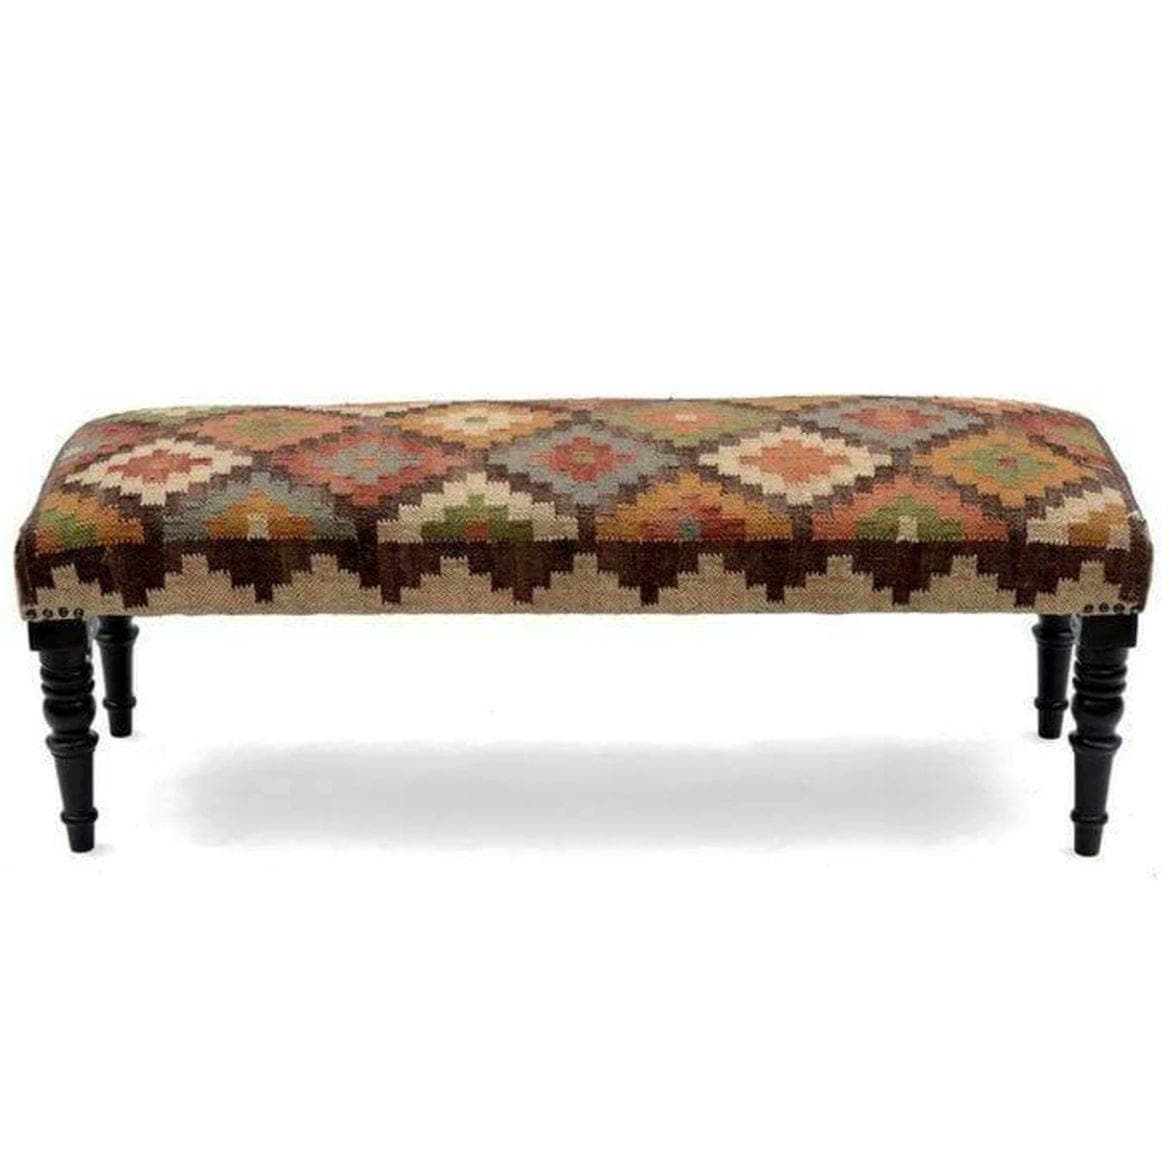 Handcrafted Upholstered Dhurrie Vintage Wooden Bench - MAIA HOMES